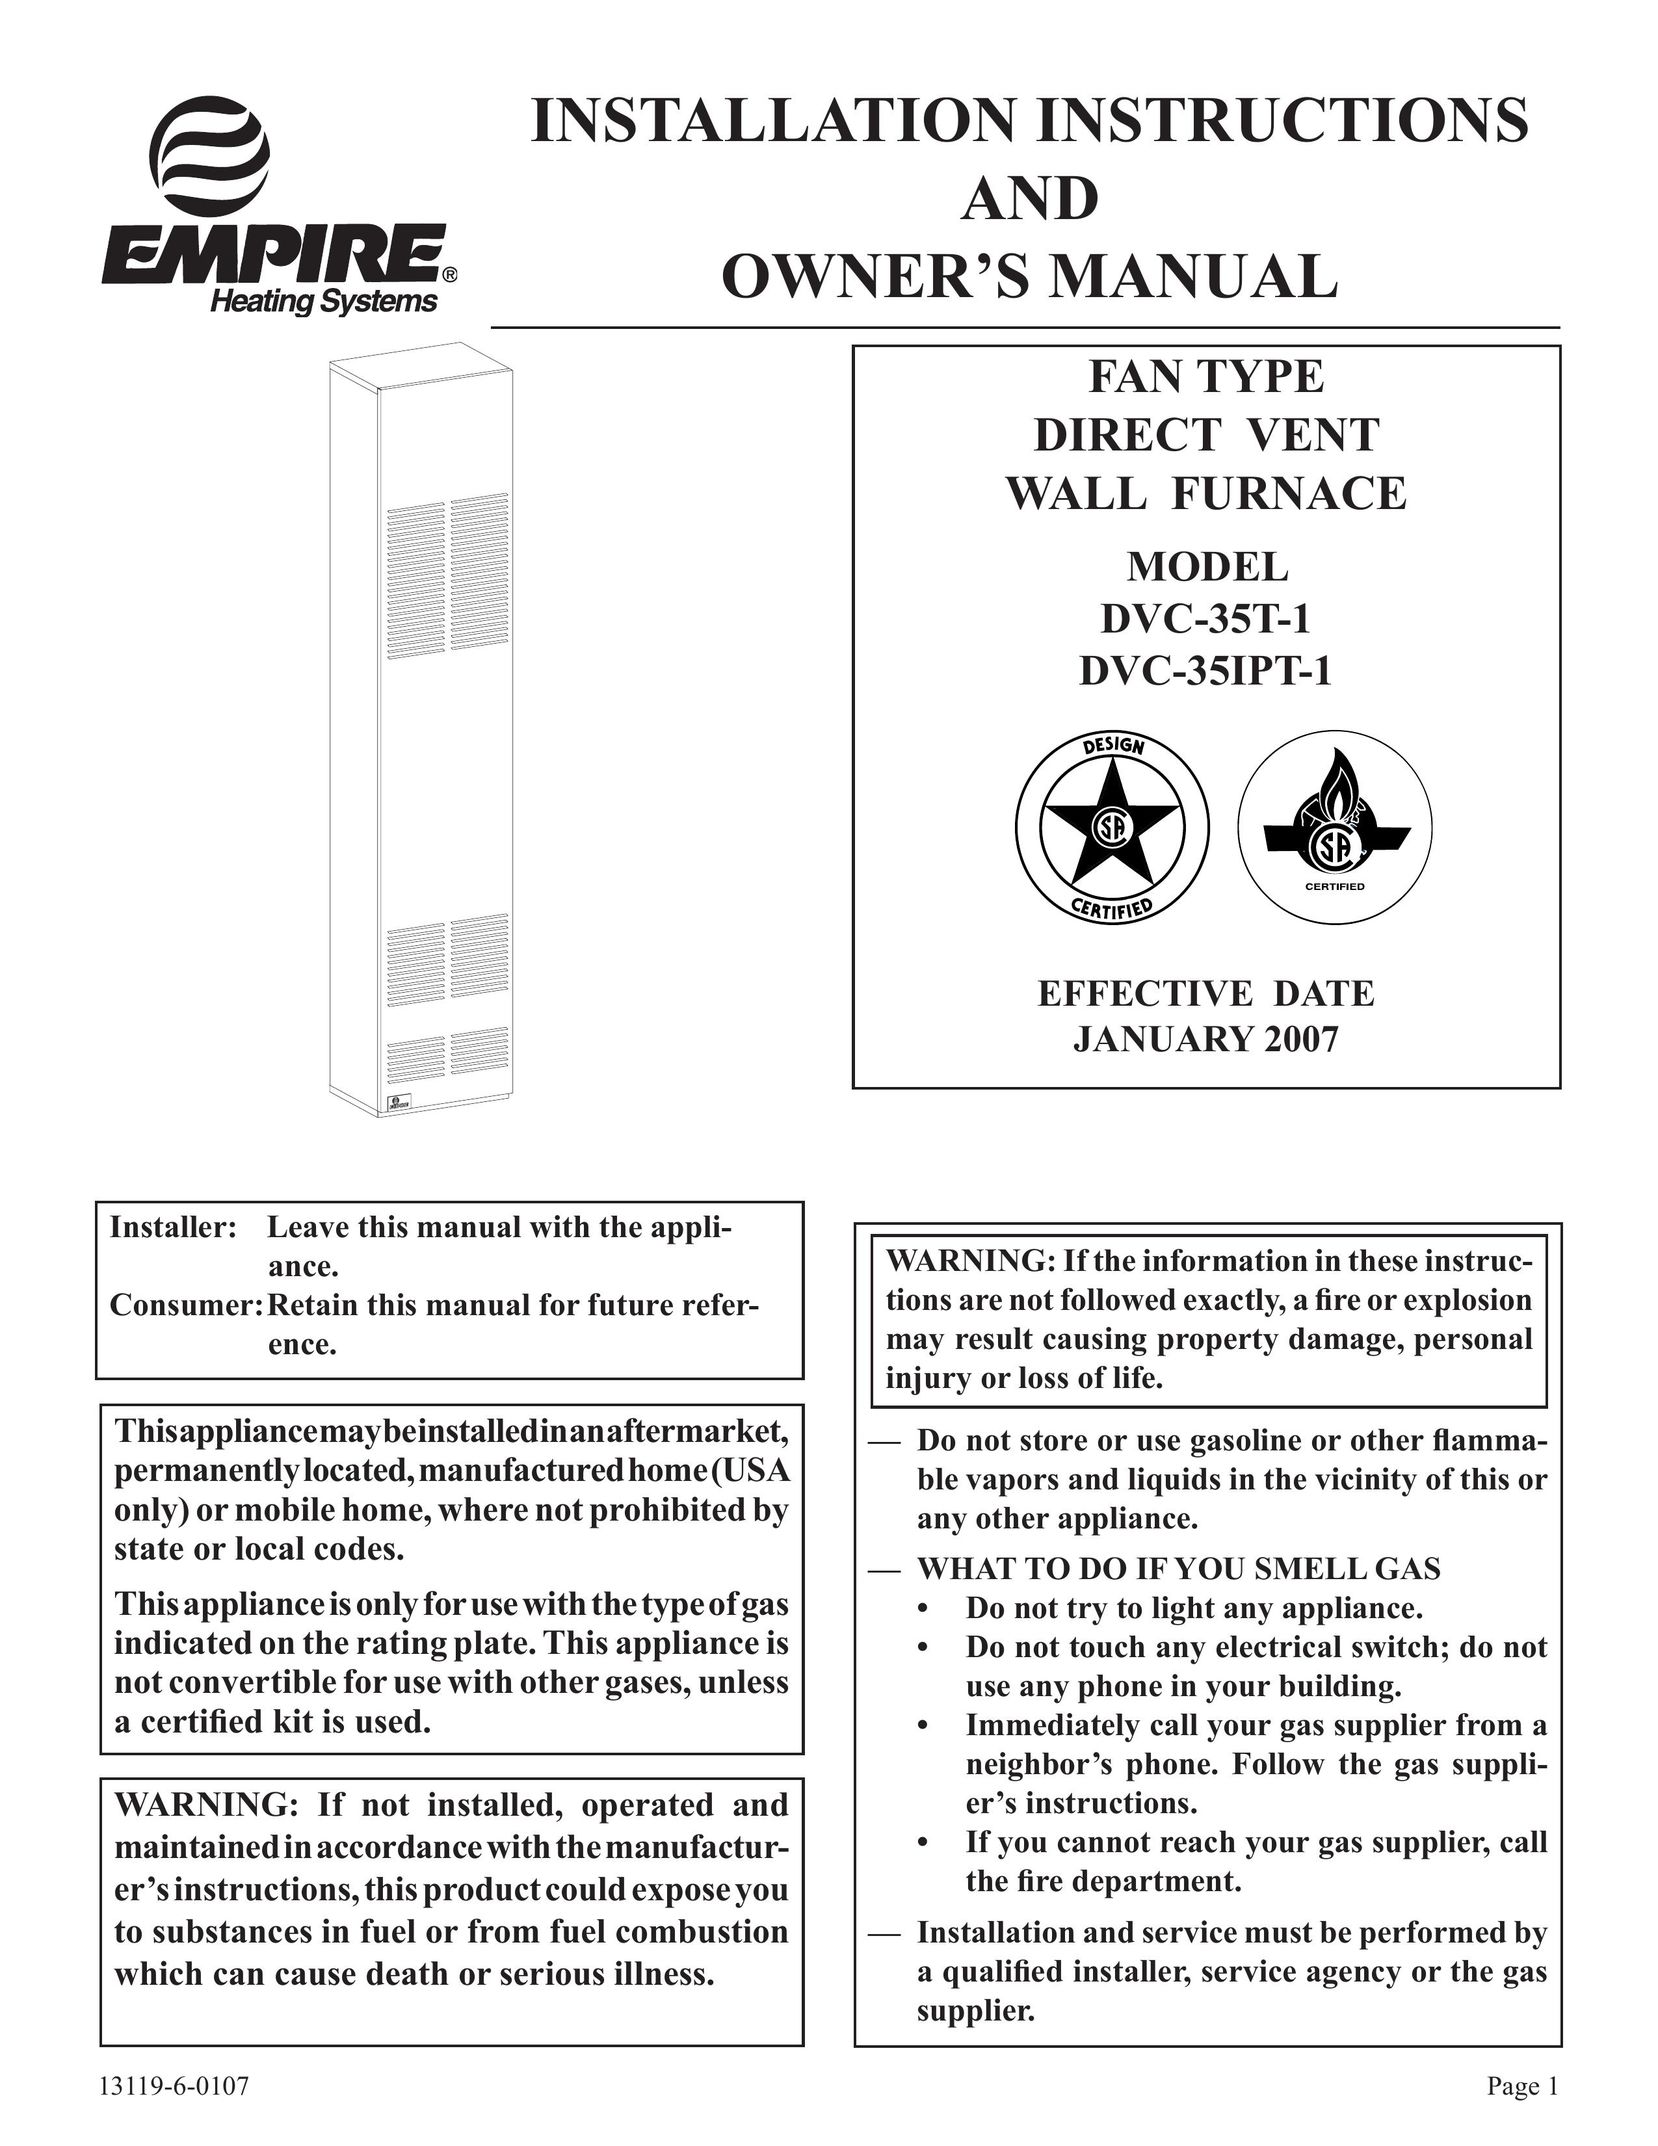 Empire Products DVC-35T-1 Furnace User Manual